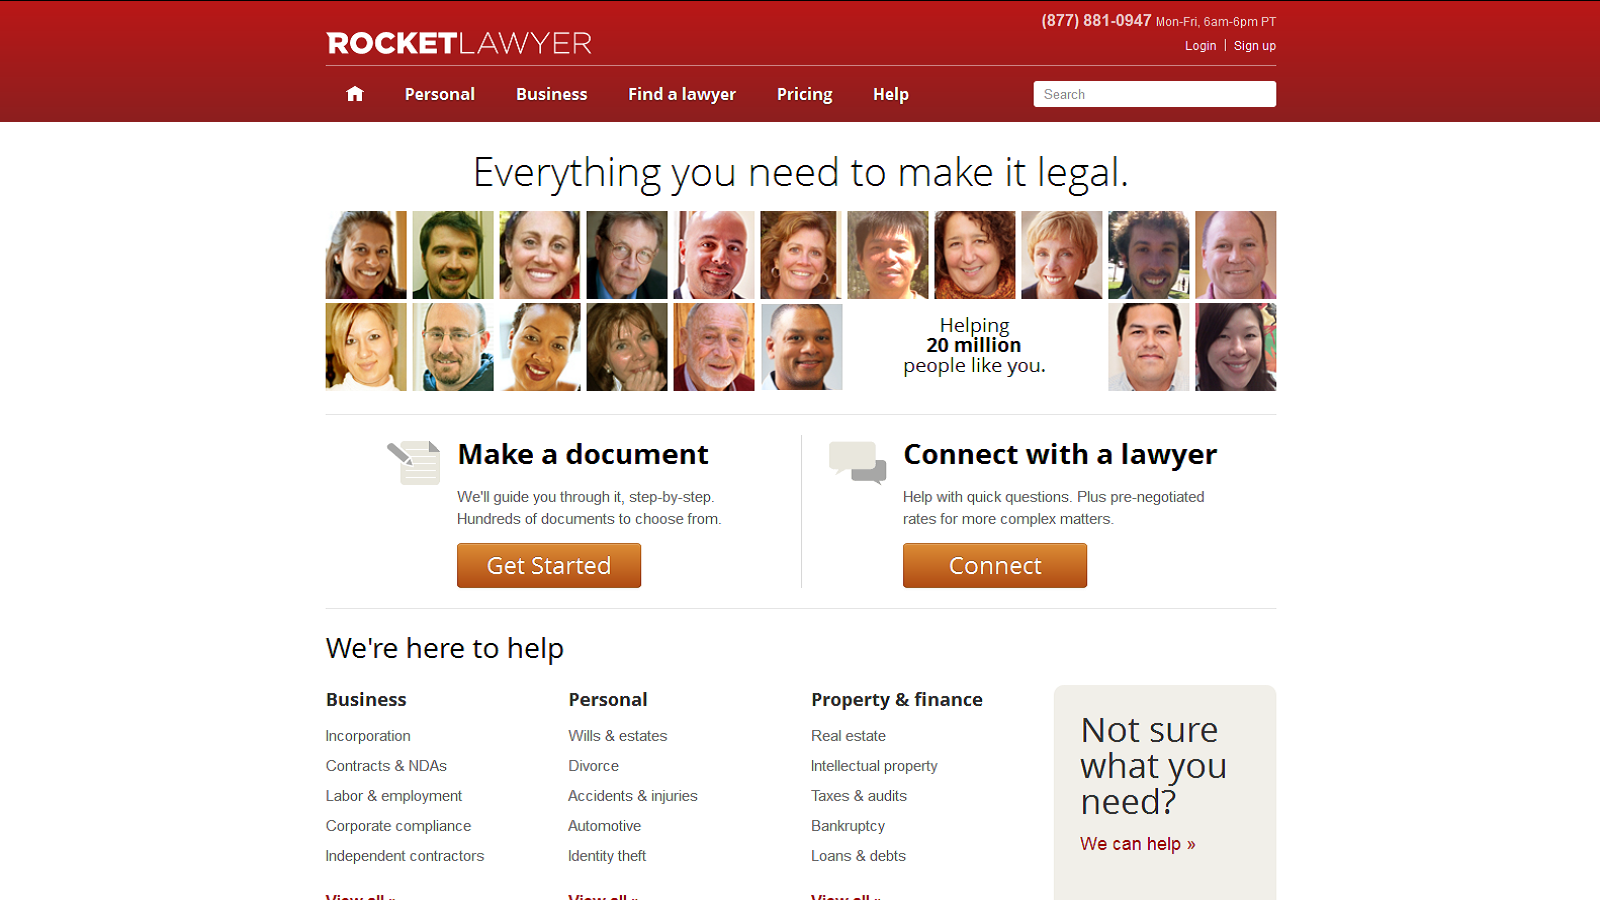 Rocket Lawyer Coupons & Promo Codes!